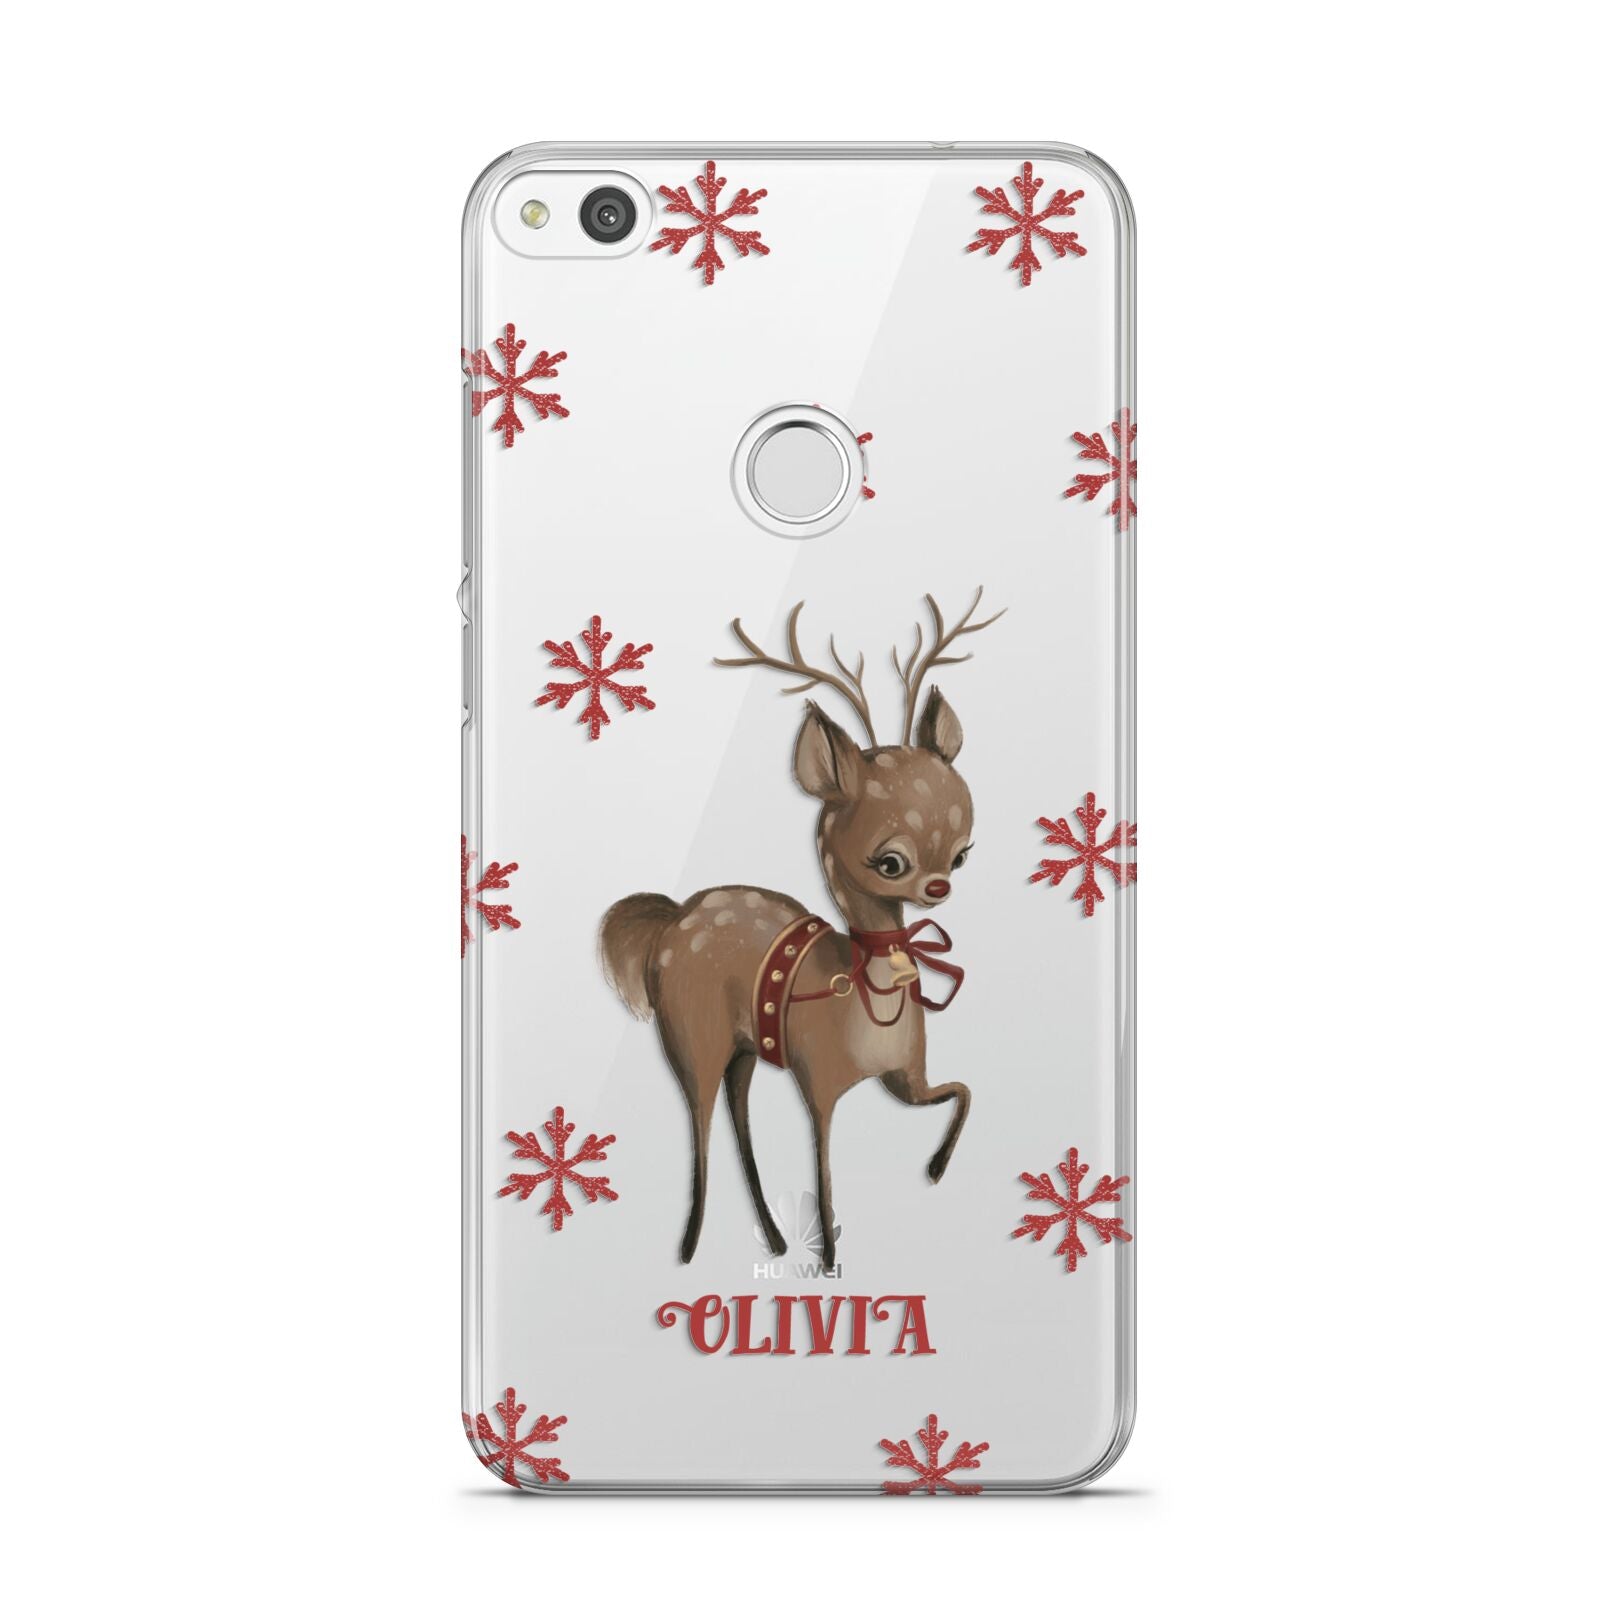 Rudolph Delivery Huawei P8 Lite Case